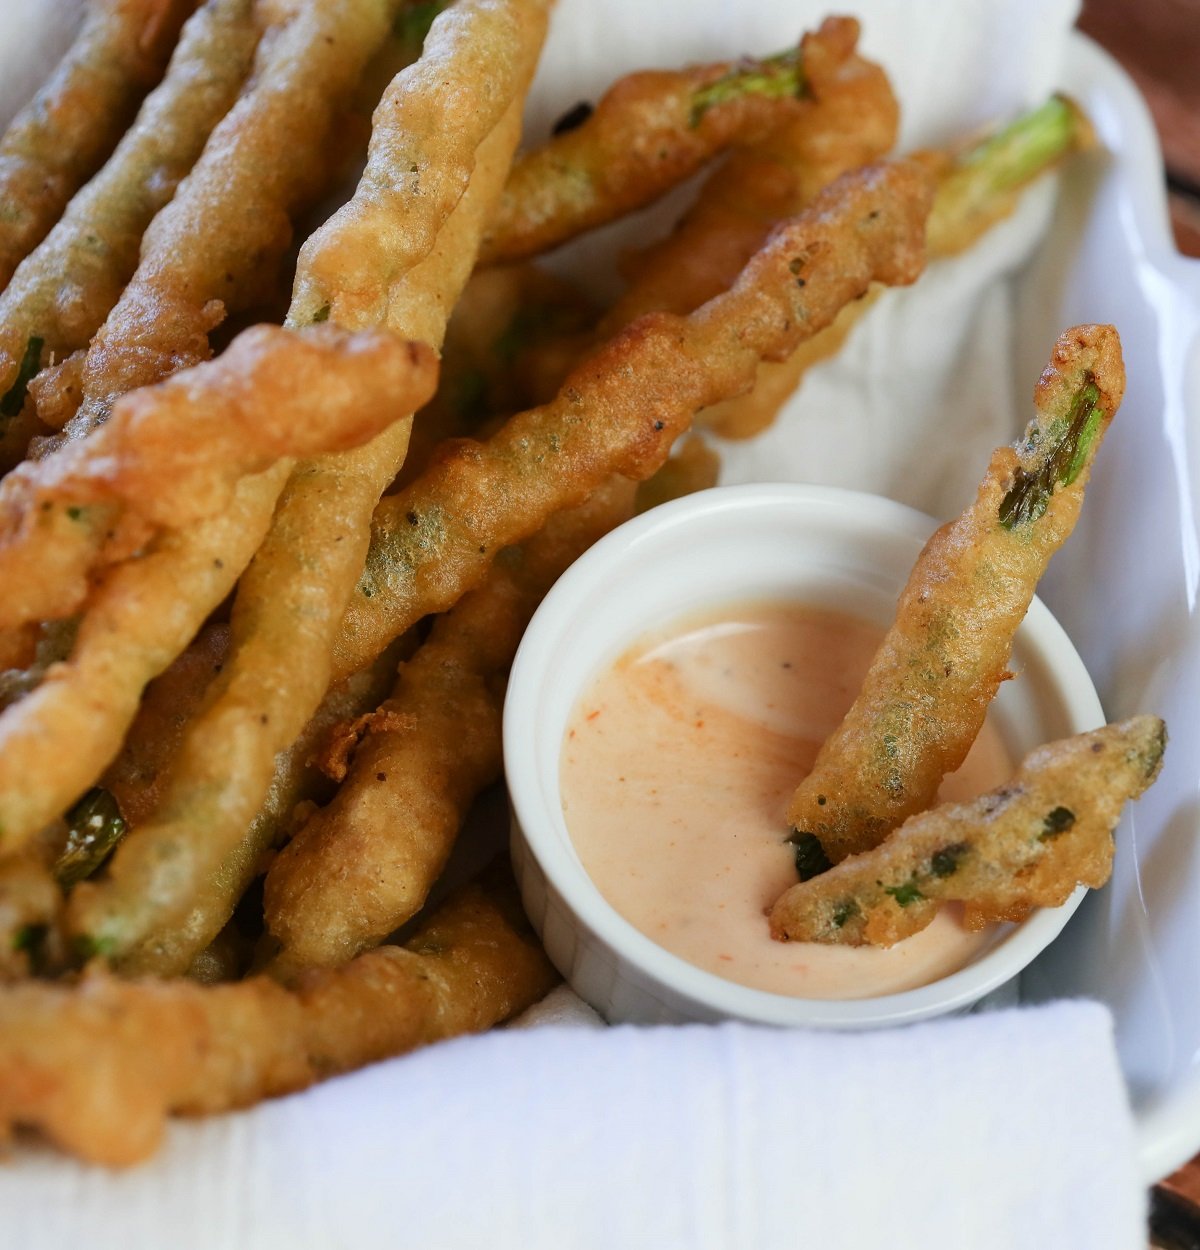 battered asparagus dipped in sauce